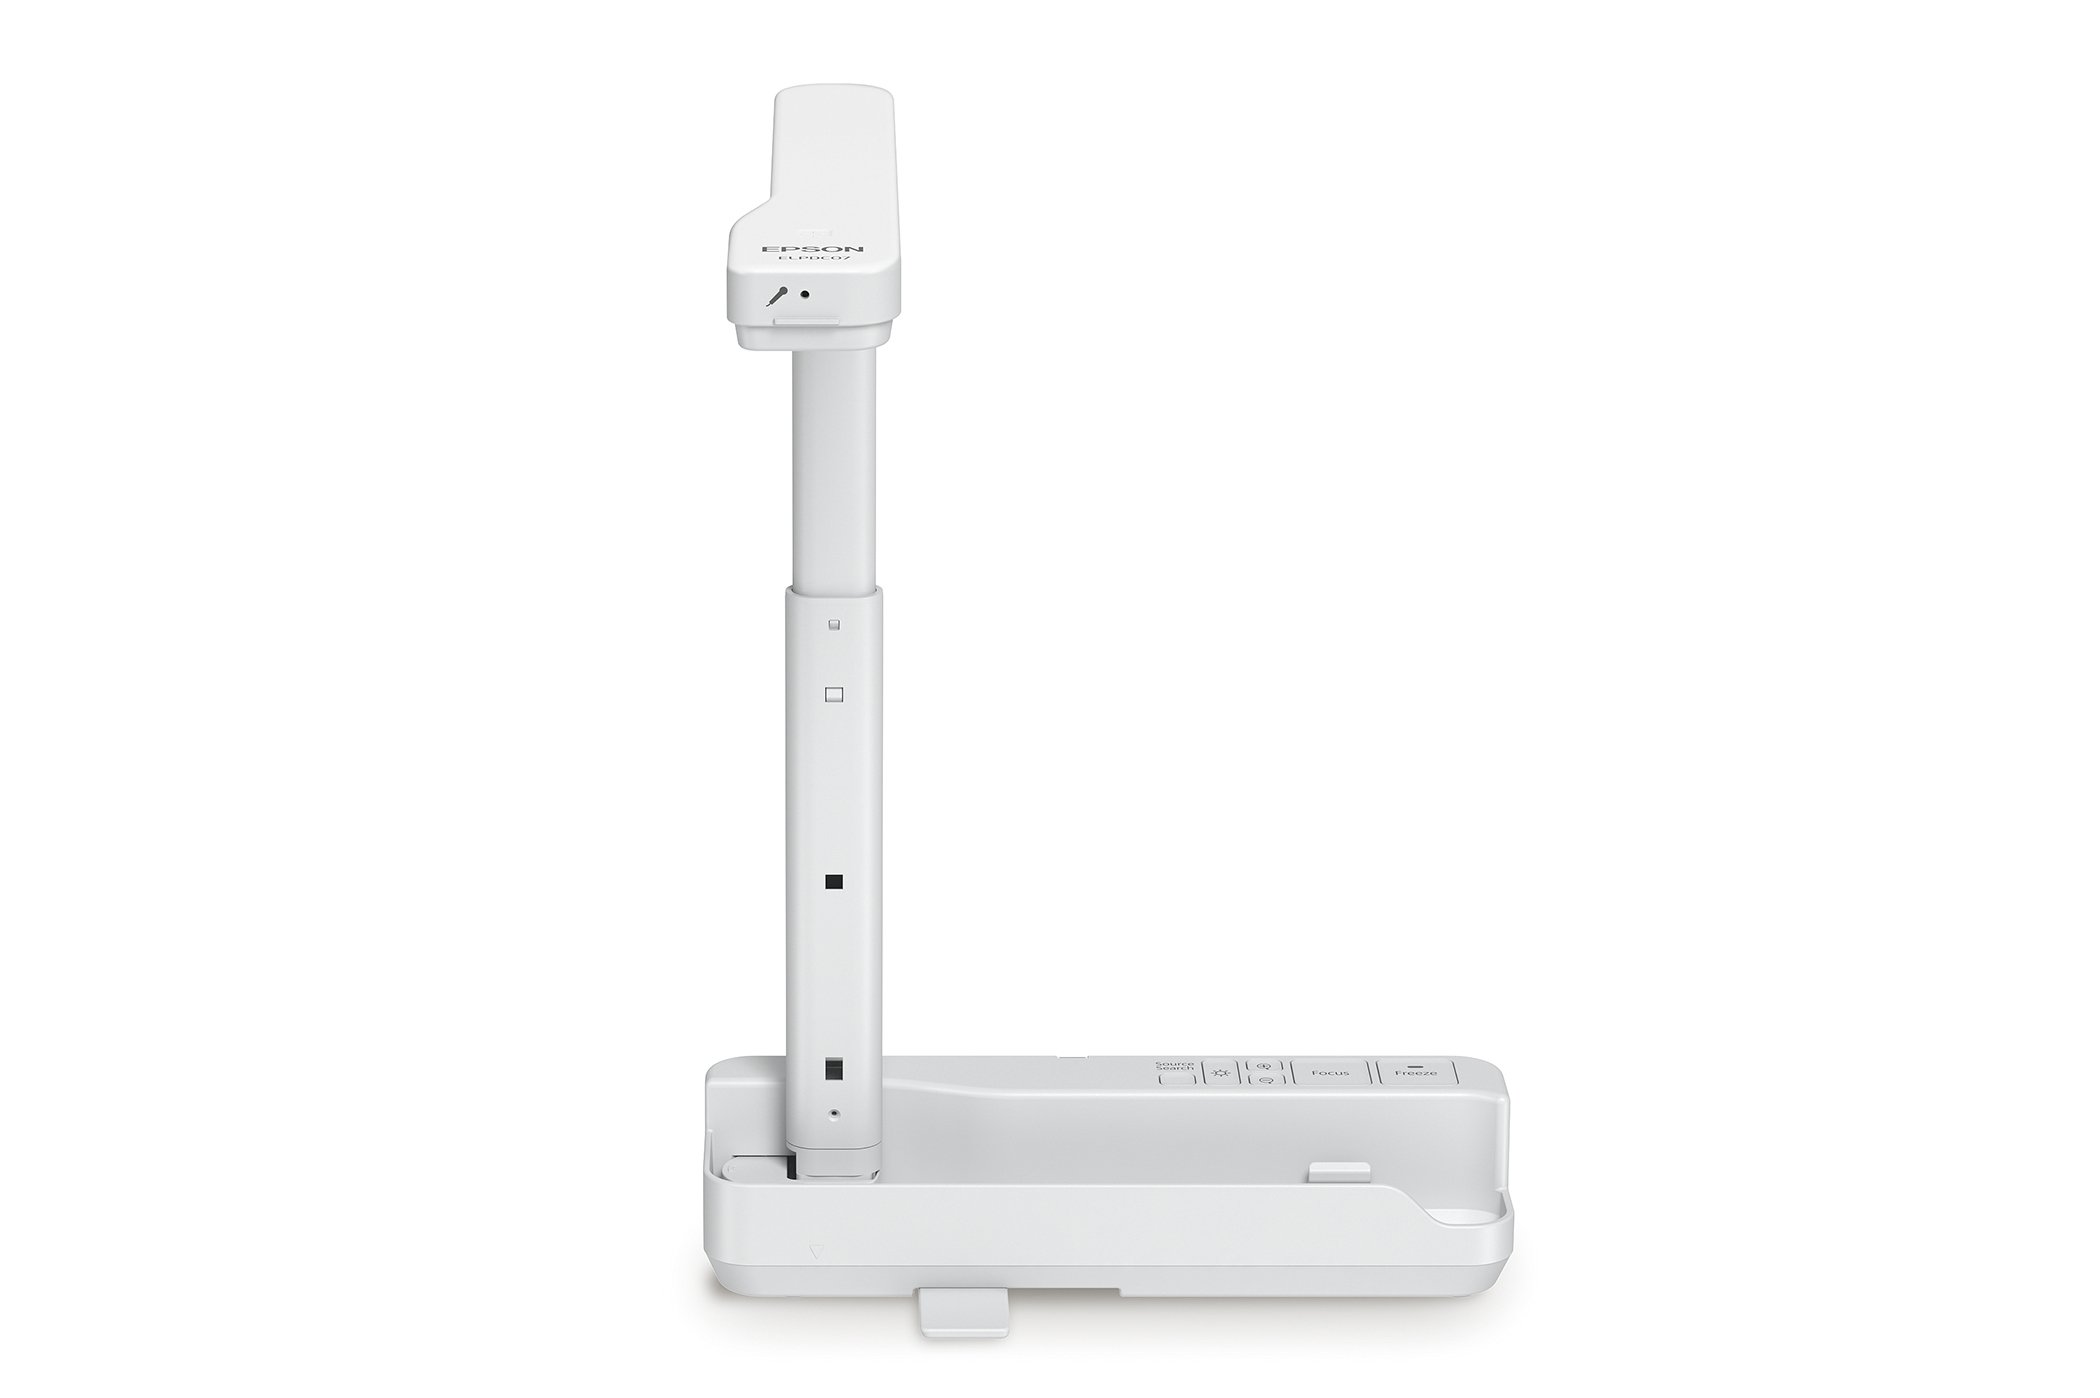 Epson DC-13 High-Definition Document Camera with HDMI, 16x Digital Zoom and 1080p Resolution